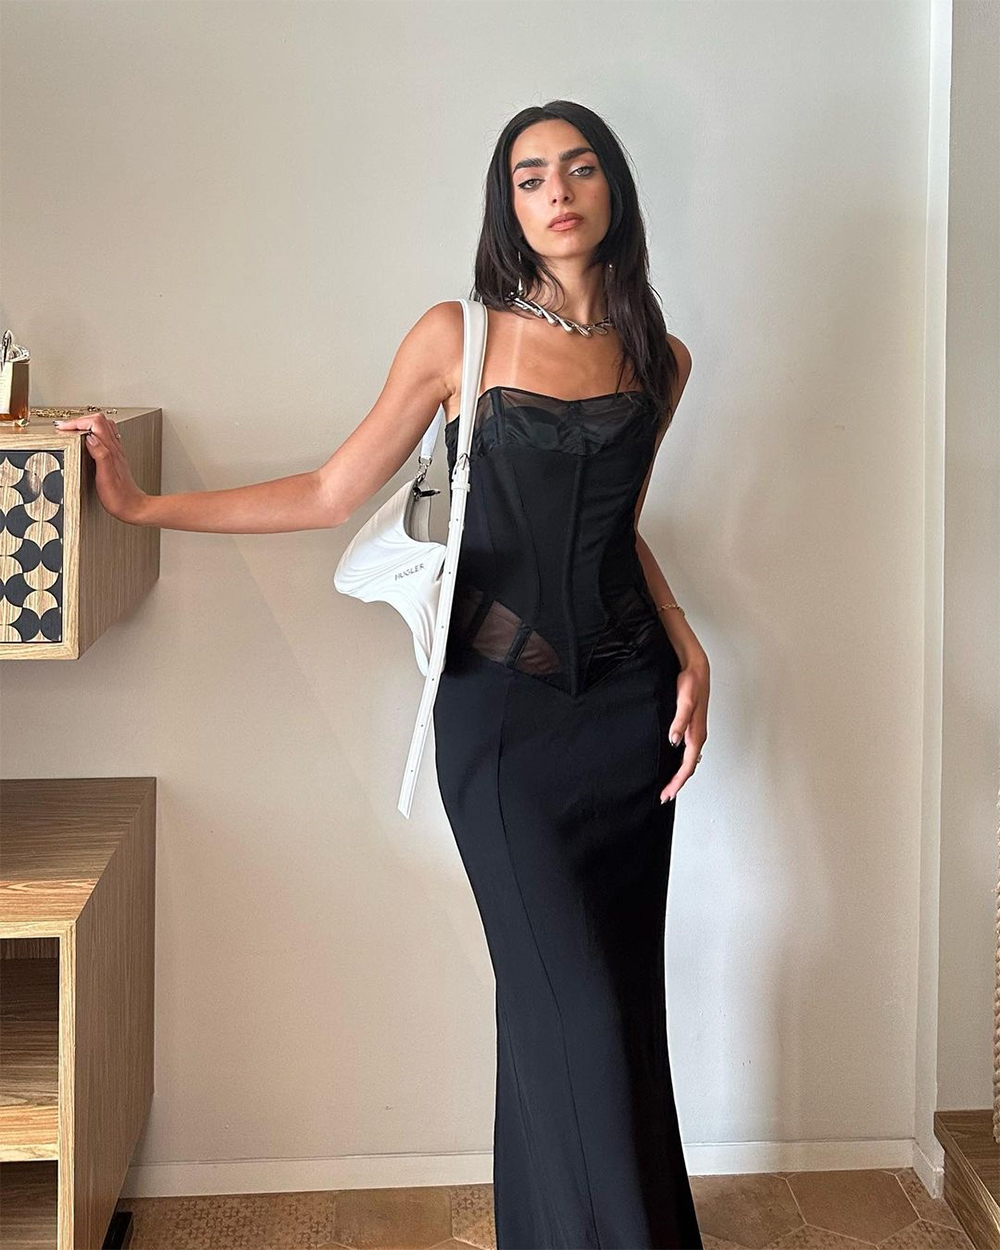 Palestinian Syrian model Lana in the latest Mugler X HM collab | About Her